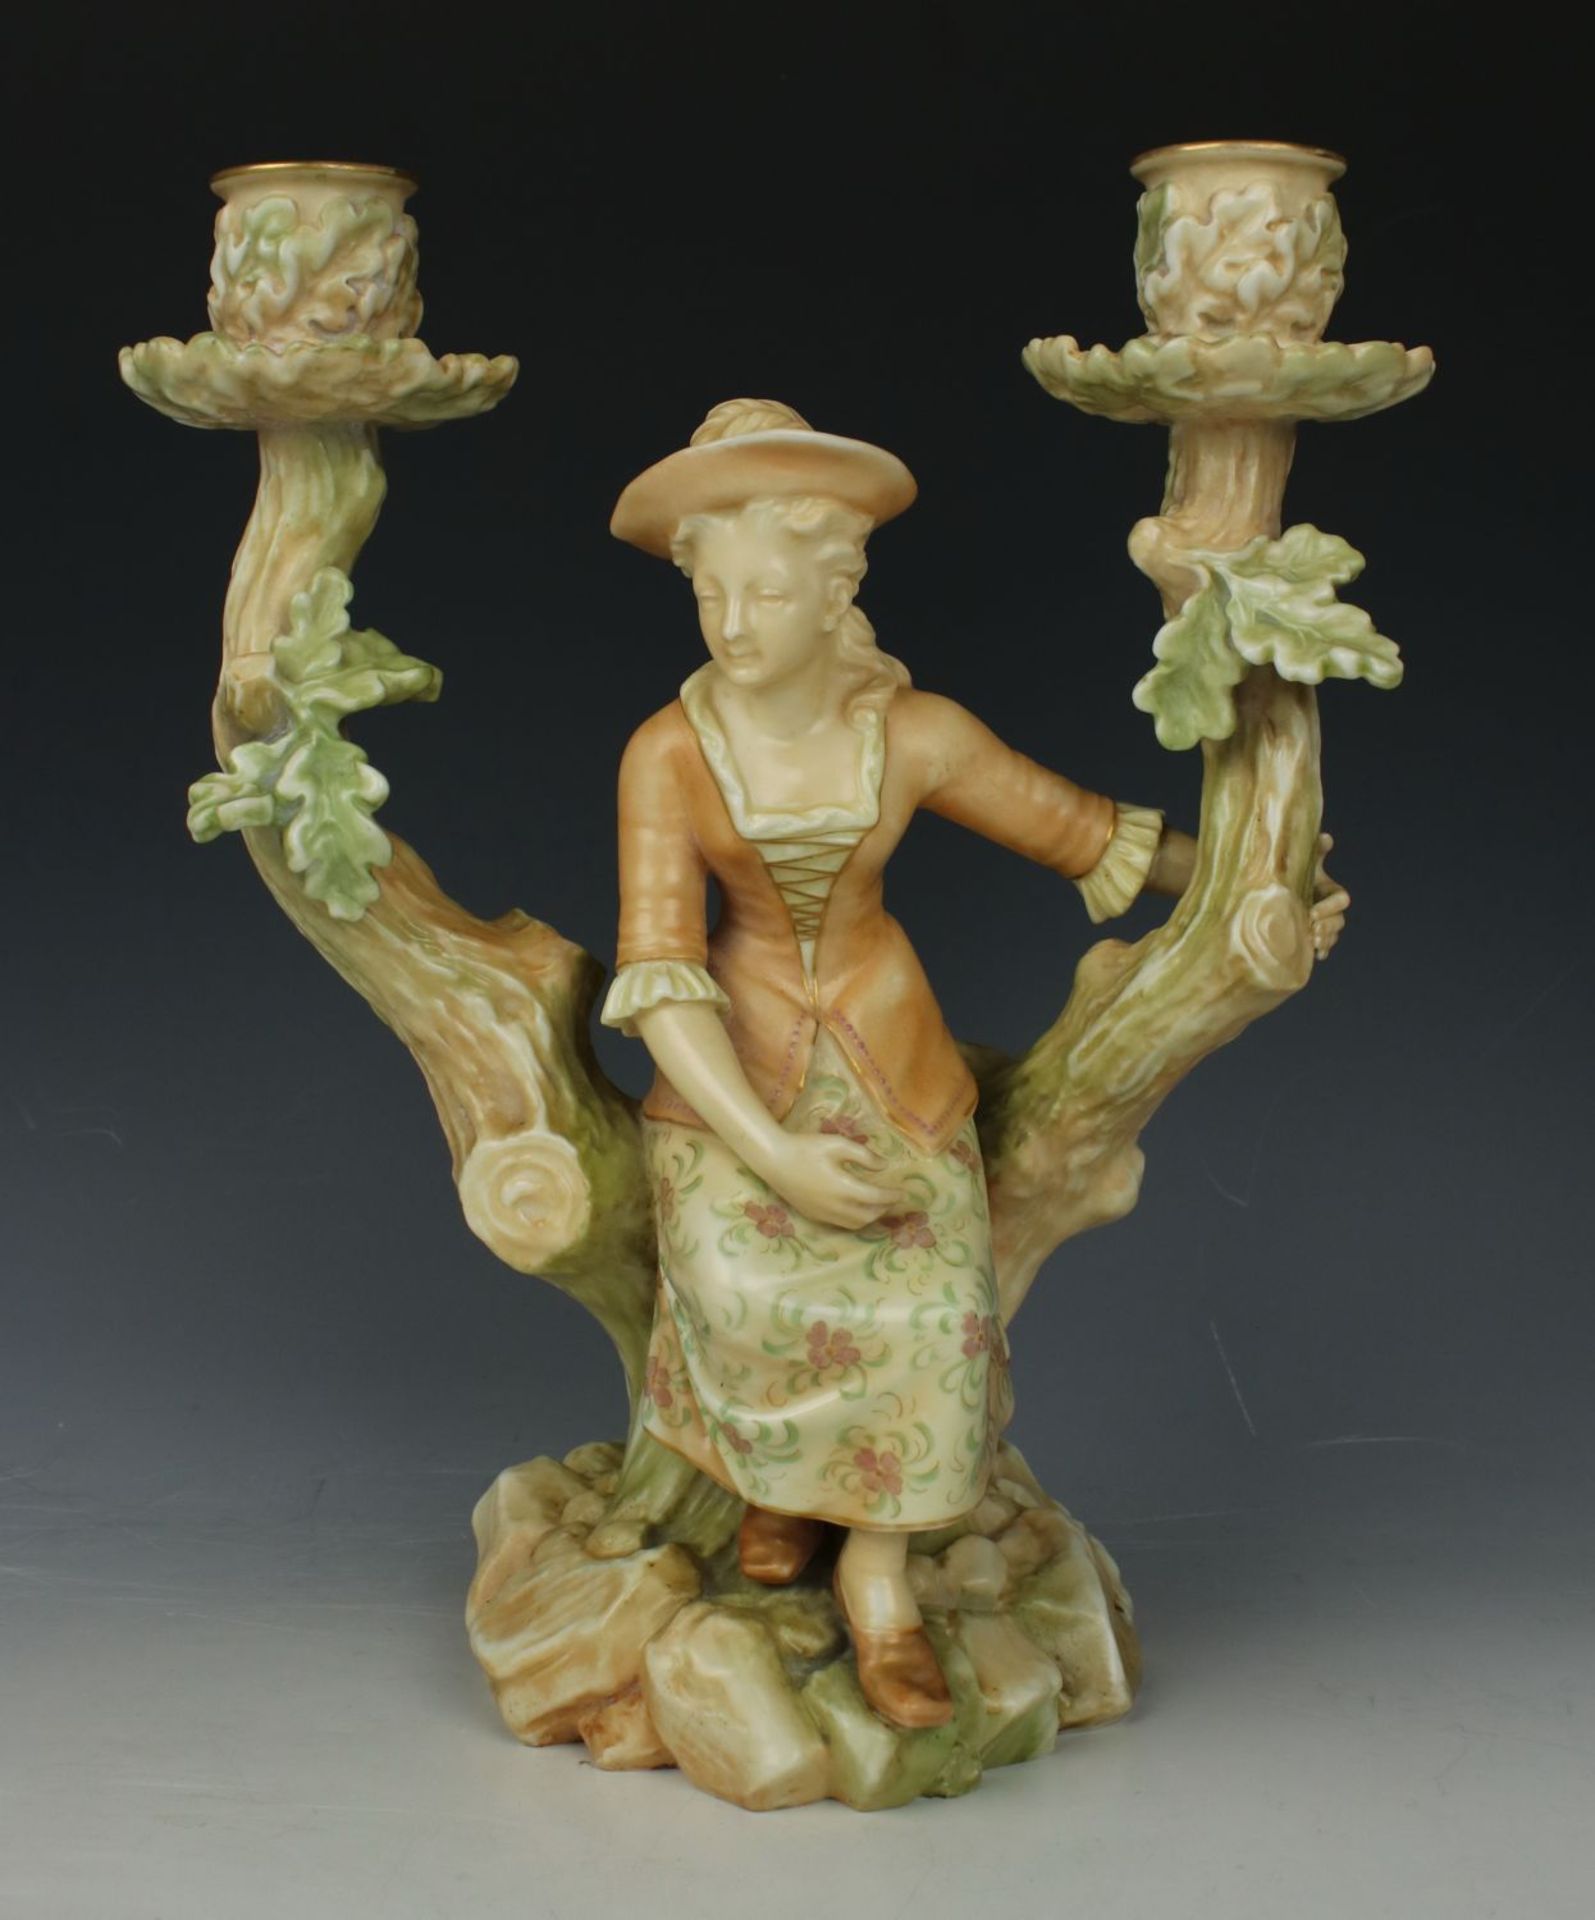 19C Royal Worcester figurine "Candle Holder with Sitting Woman"